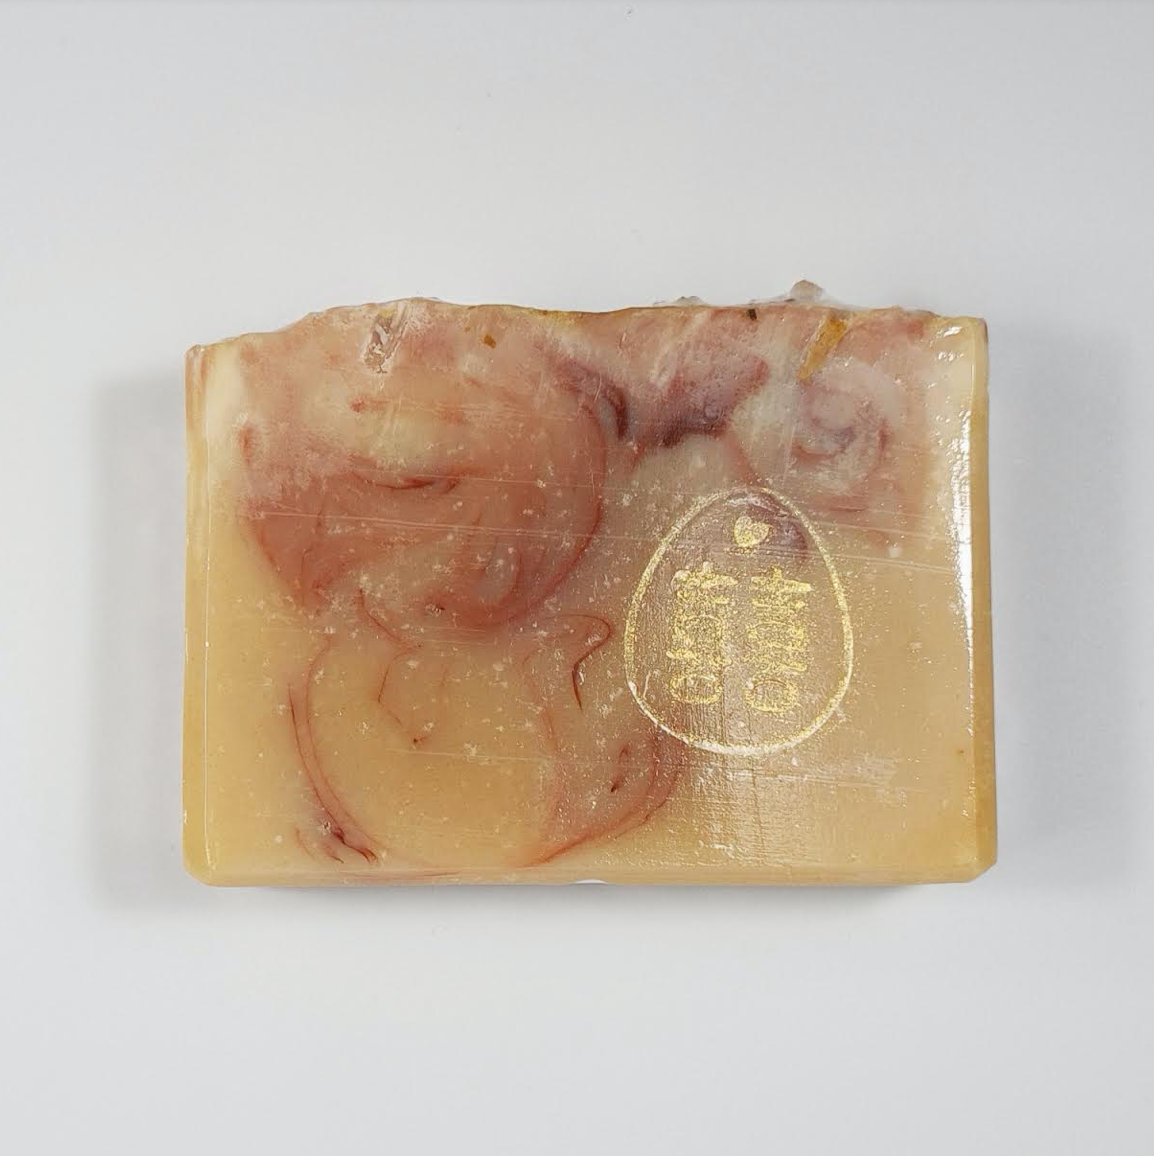 Rose Patchouli Clay Soap